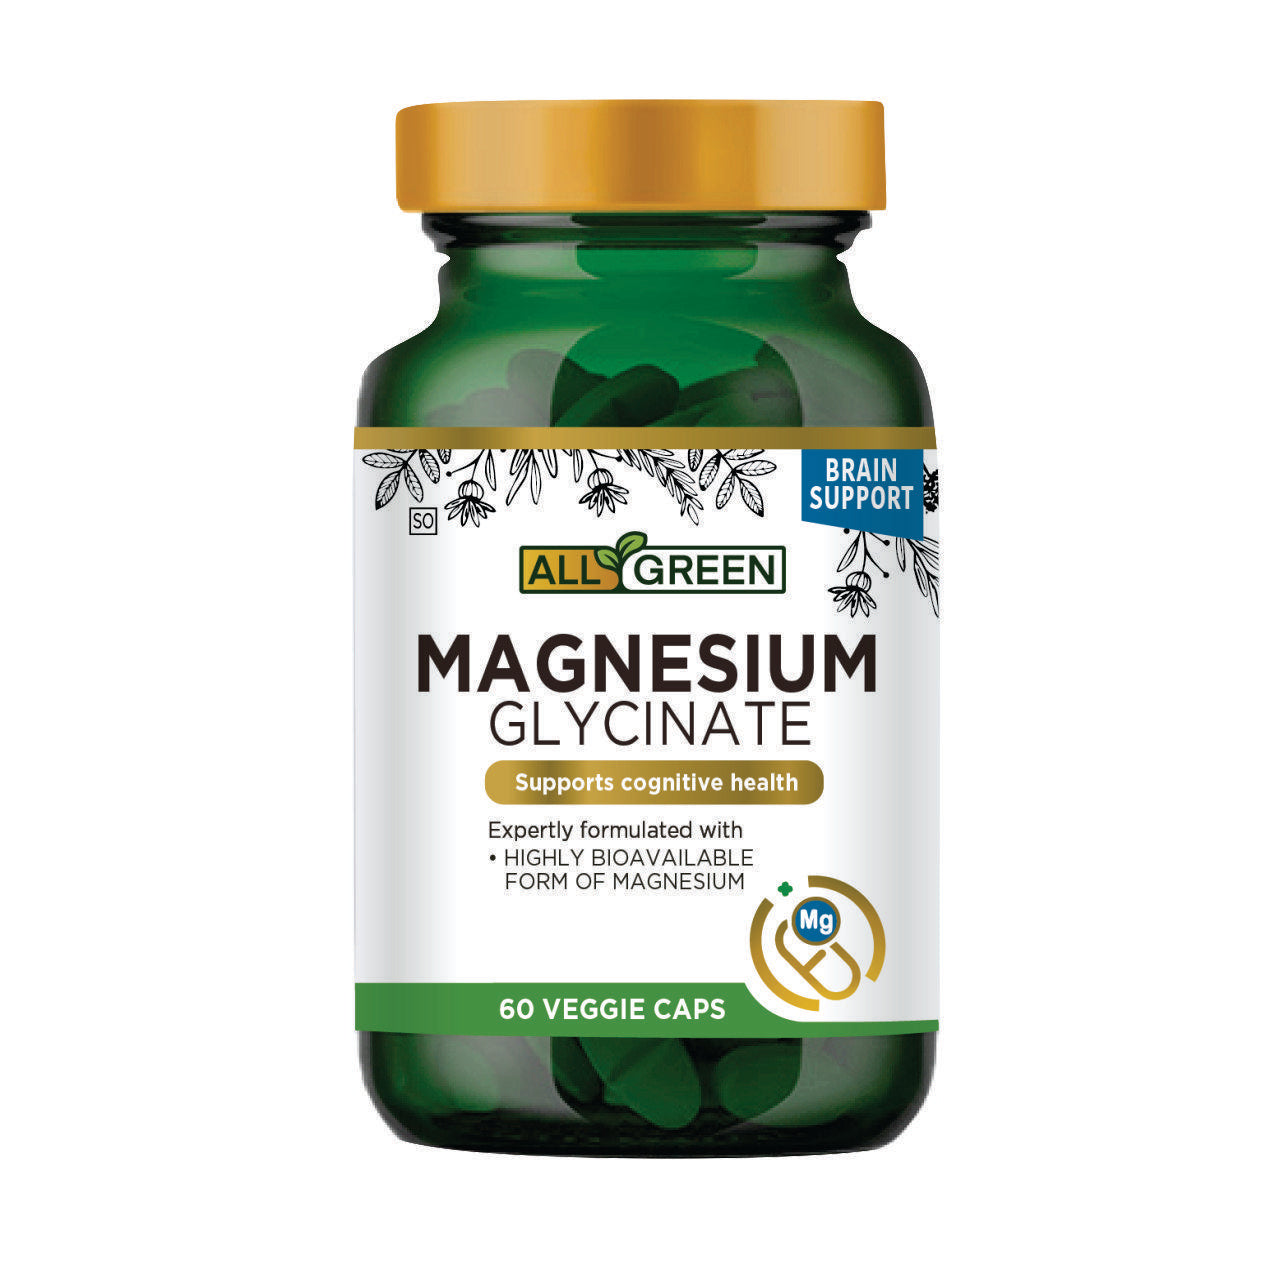 All Green - Magnesium Glycinate 60